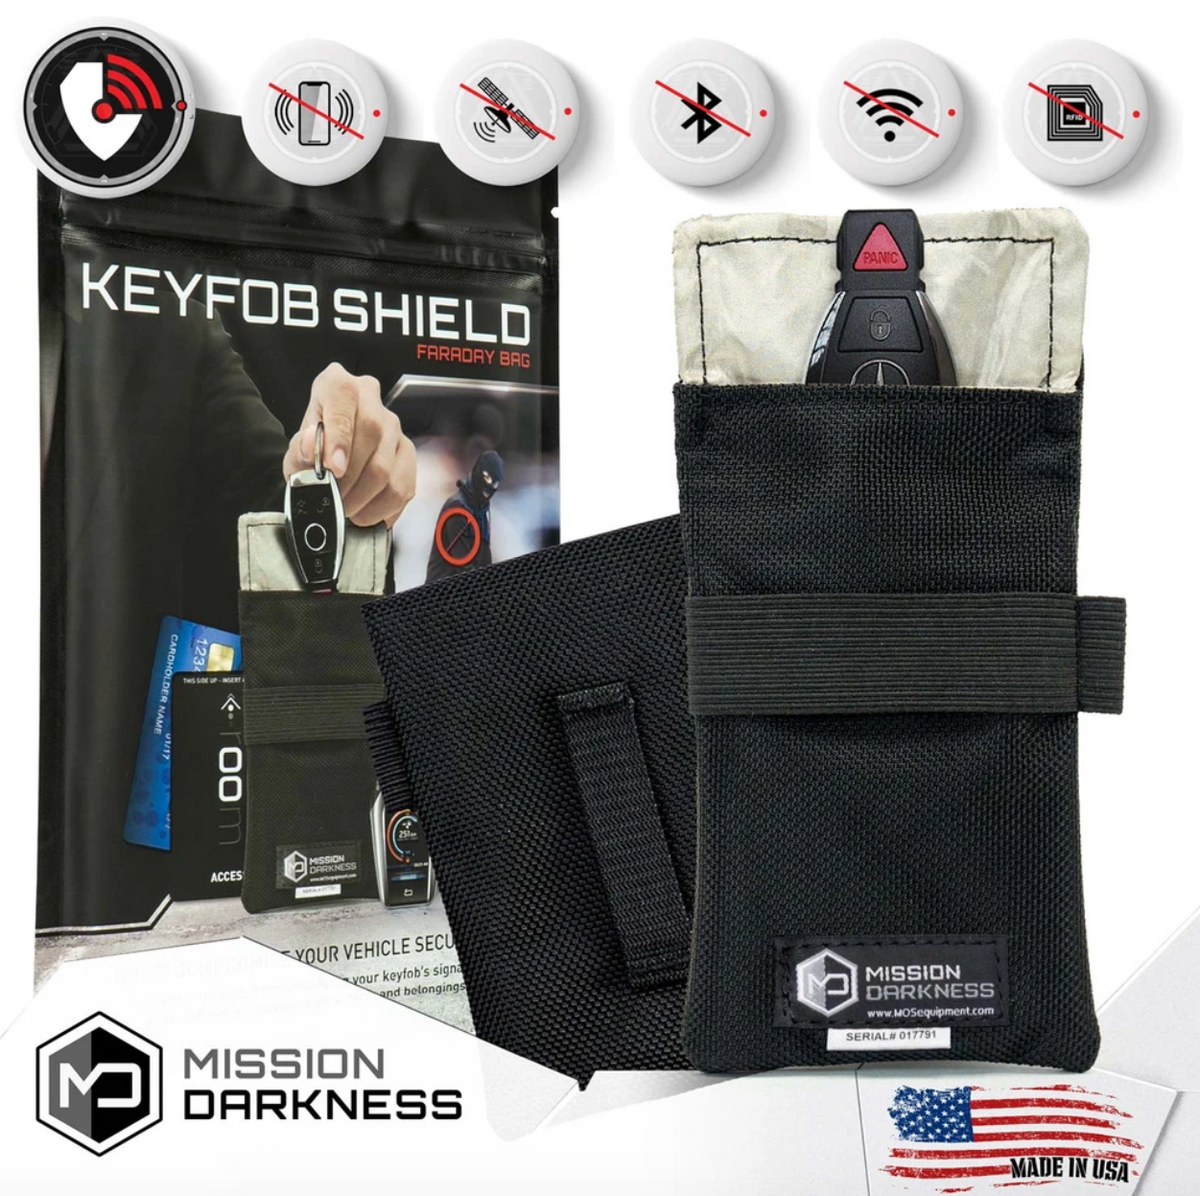  Mission Darkness Faraday Bag for Keyfobs (2-Pack) // RF  Shielding Protective Case for Smart Always On Keys Fobs Transmitters Small  Electronics Vehicle Security Anti-Hacking Block Signal Relay : Automotive